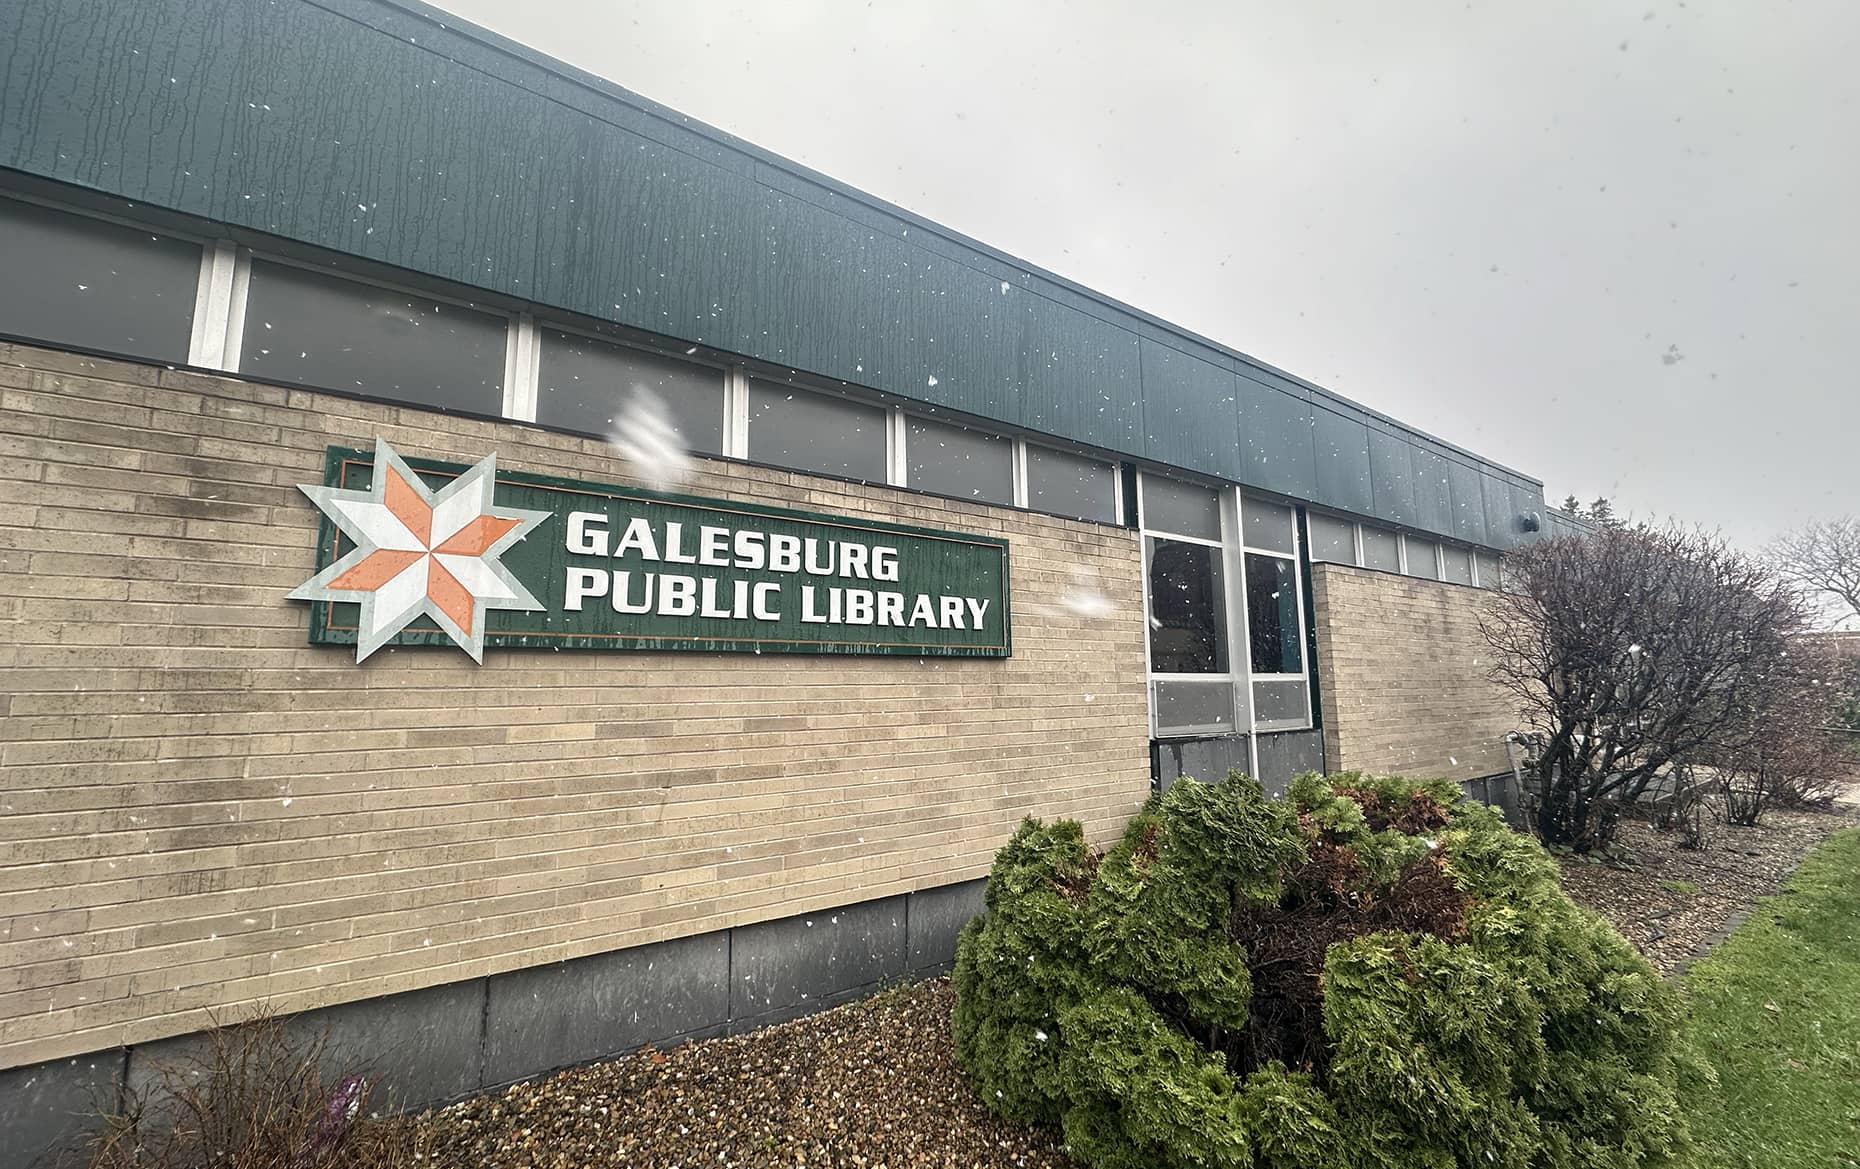 The recently-closed Galesburg Public Library at 40 E. Simmons St. in Galesburg